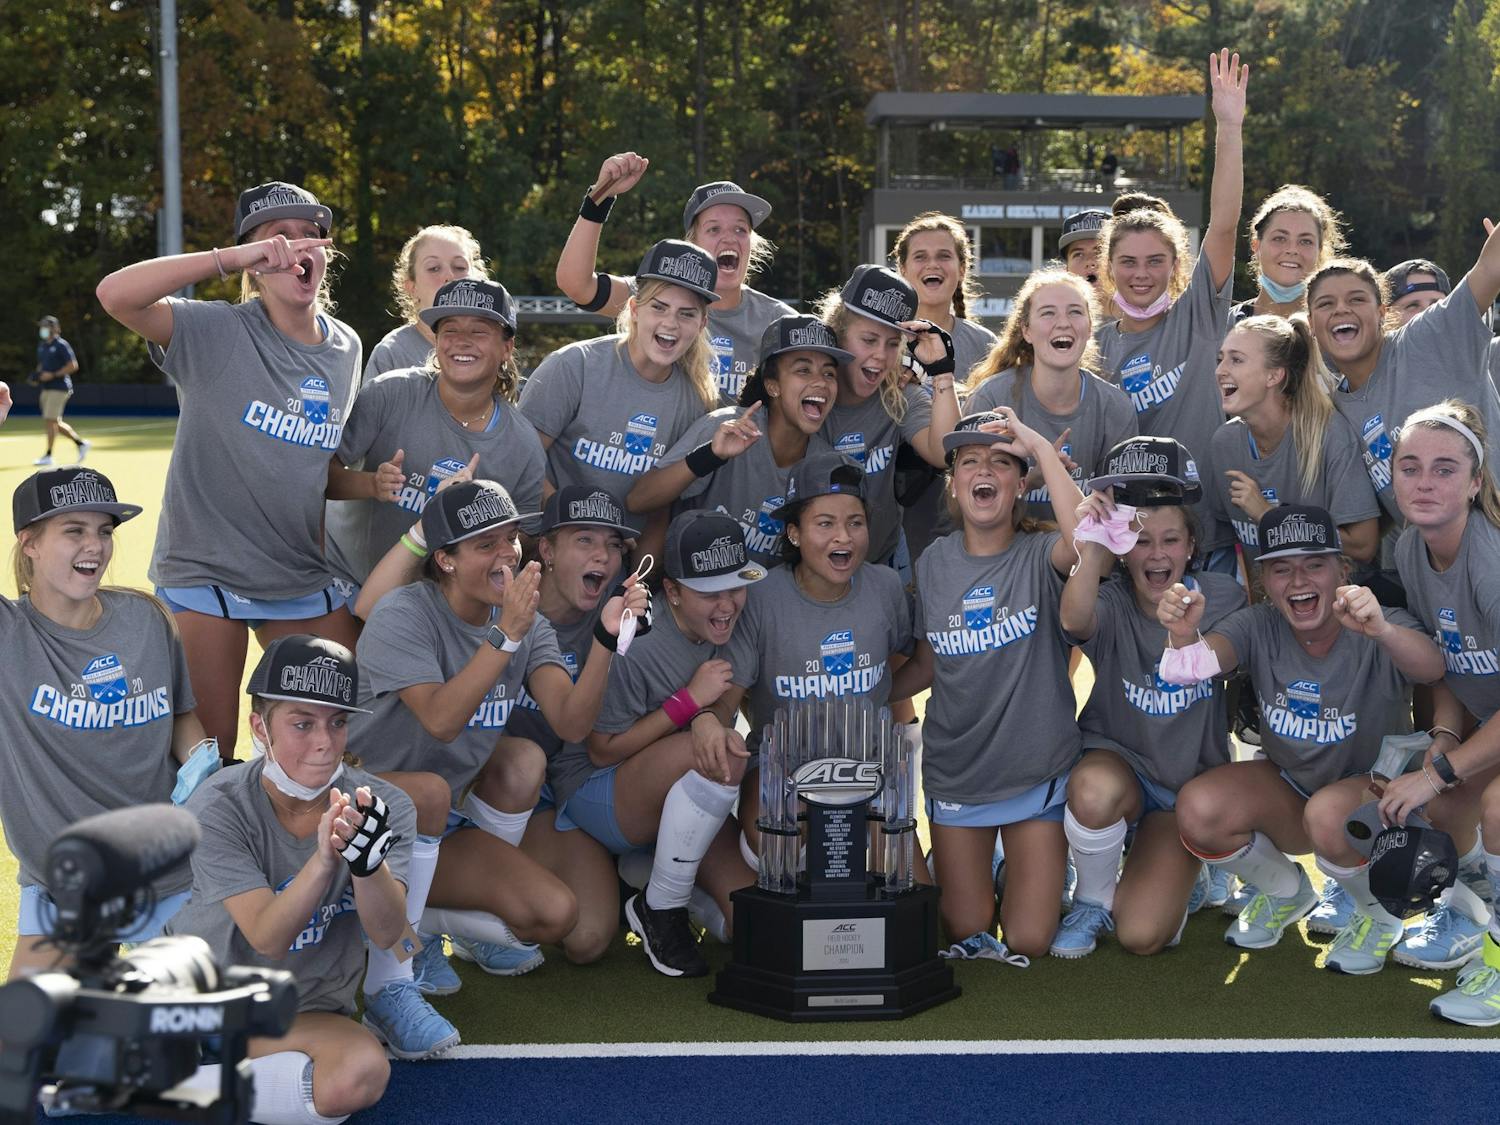 UNC field hockey celebrates following their win against Louisville in the ACC Field Hockey Championship on Nov. 8, 2020 in Karen Shelton Stadium. UNC beat Louisville 4-2, securing their fourth consecutive tournament championship.